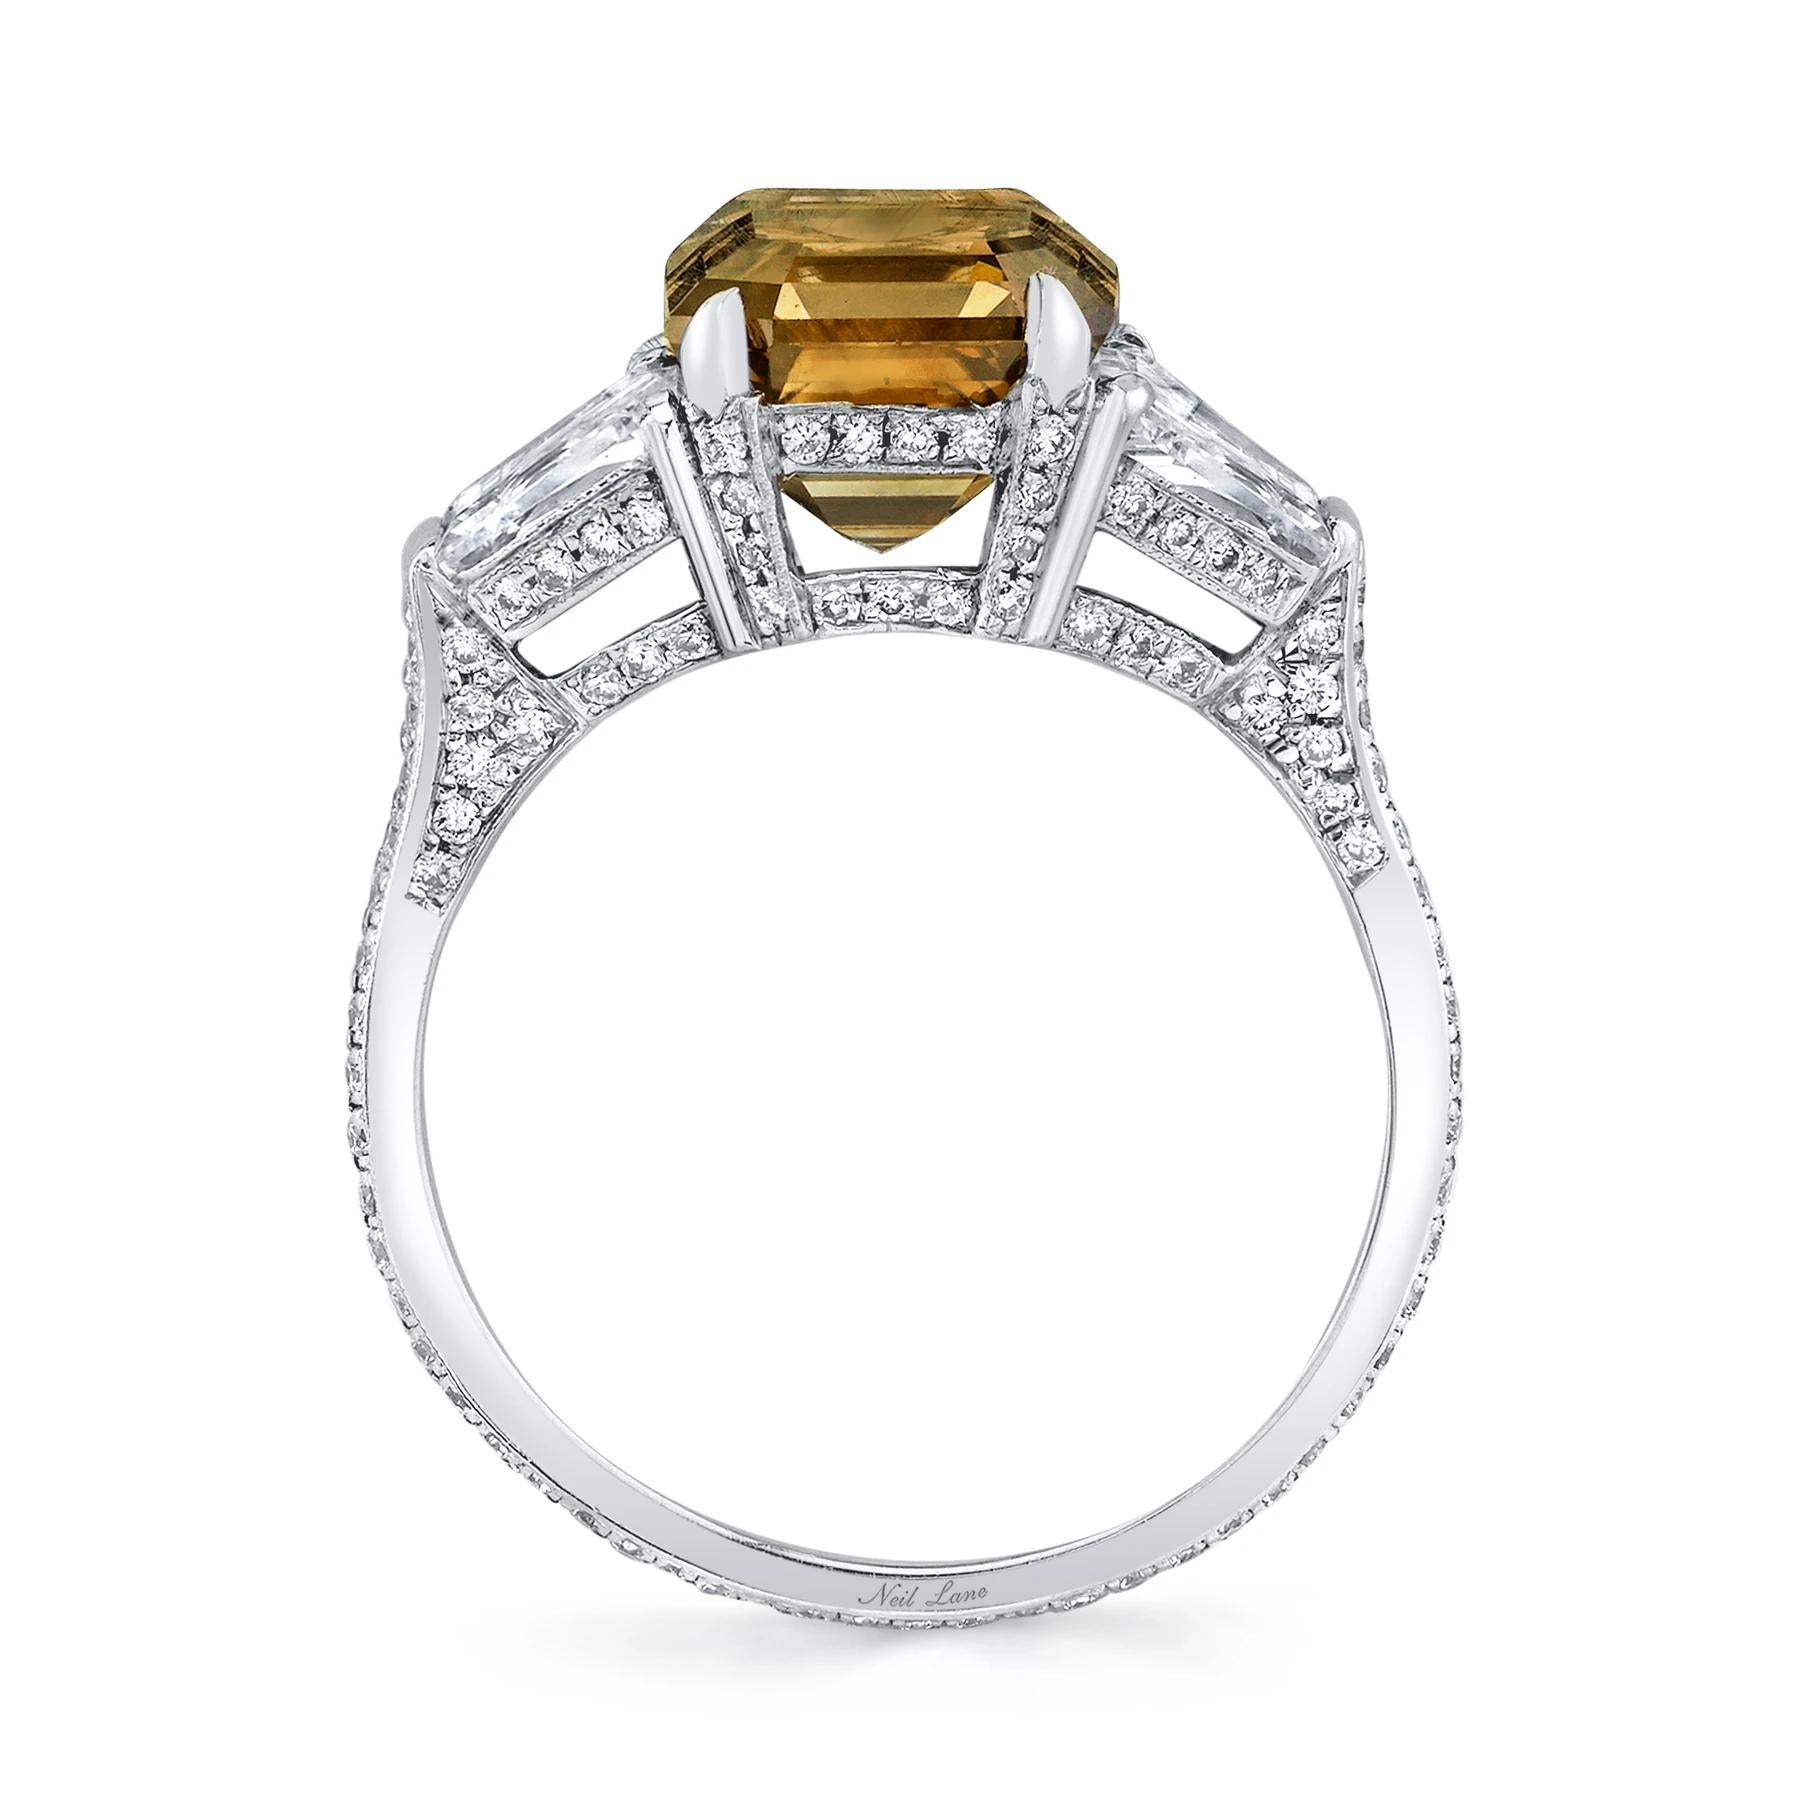 A compelling 3.02 CT, Natural Fancy Dark Orange-Brown square emerald-cut diamond creates an important presence in this platinum ring, paired with two trapezoid-cut diamonds weighing 1.00 ct., further supporting these three stone are one hundred